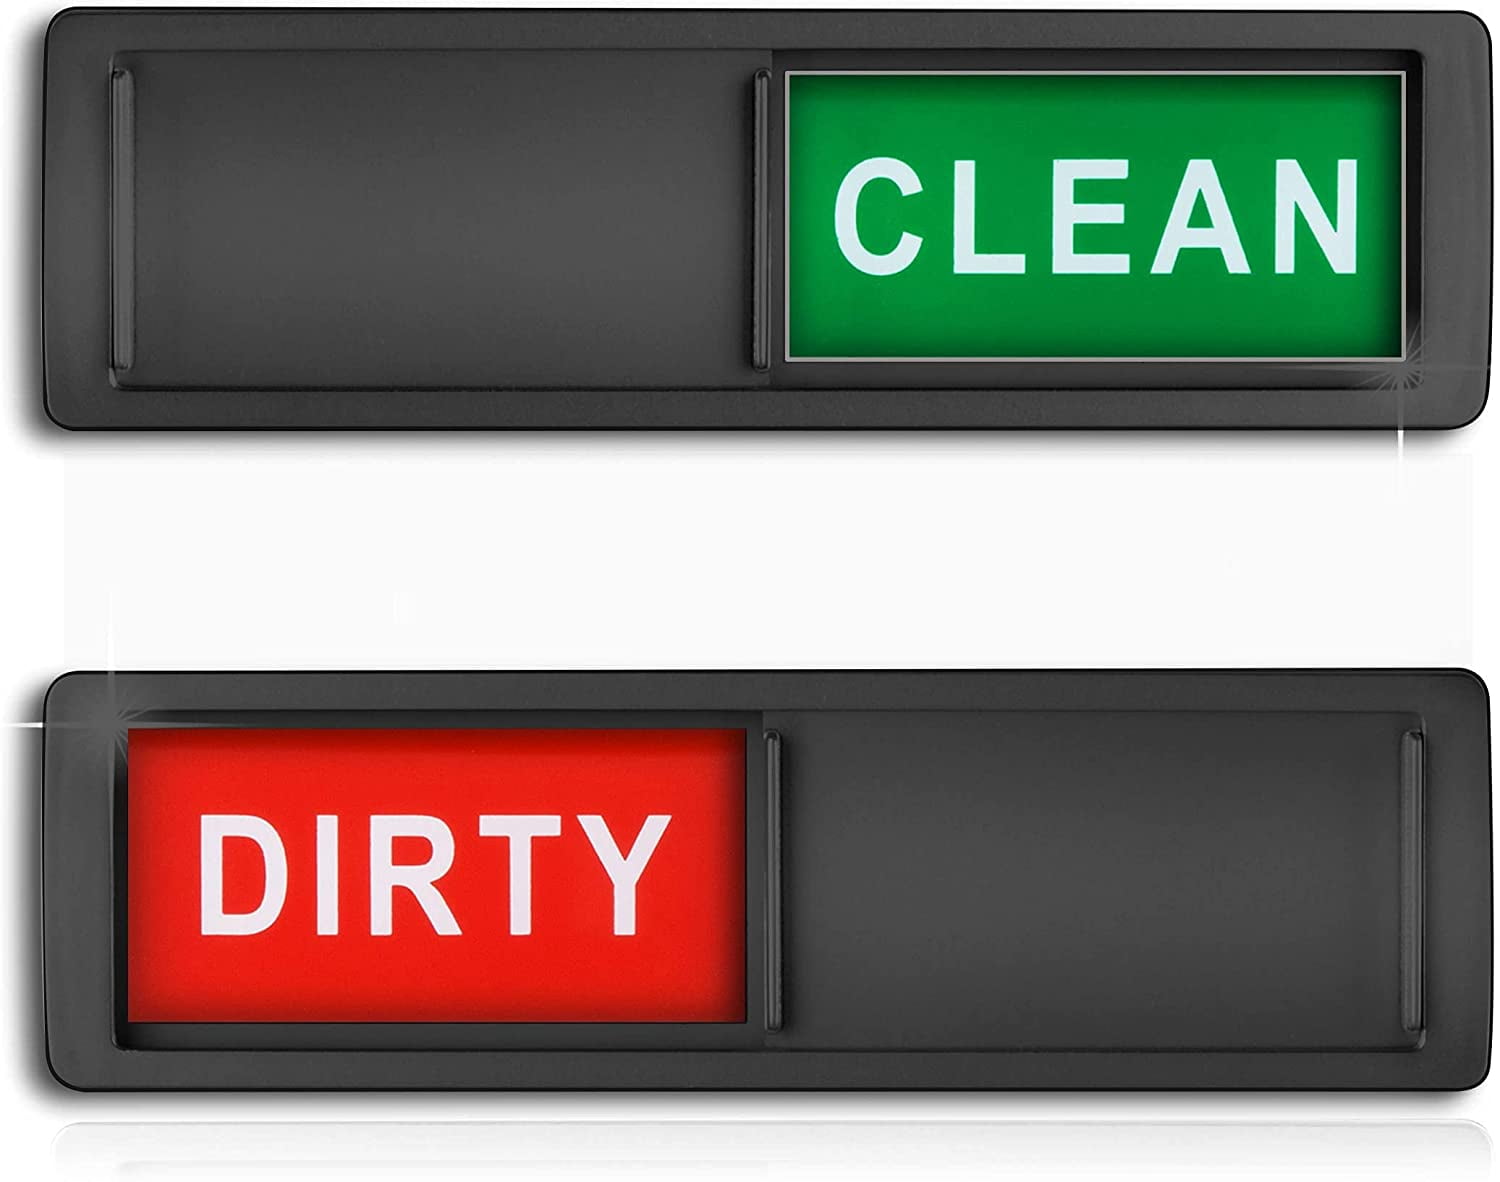 Clean Dirty Dishwasher Magnet Non-Scratch Magnetic Black Signage Indicator  Sign